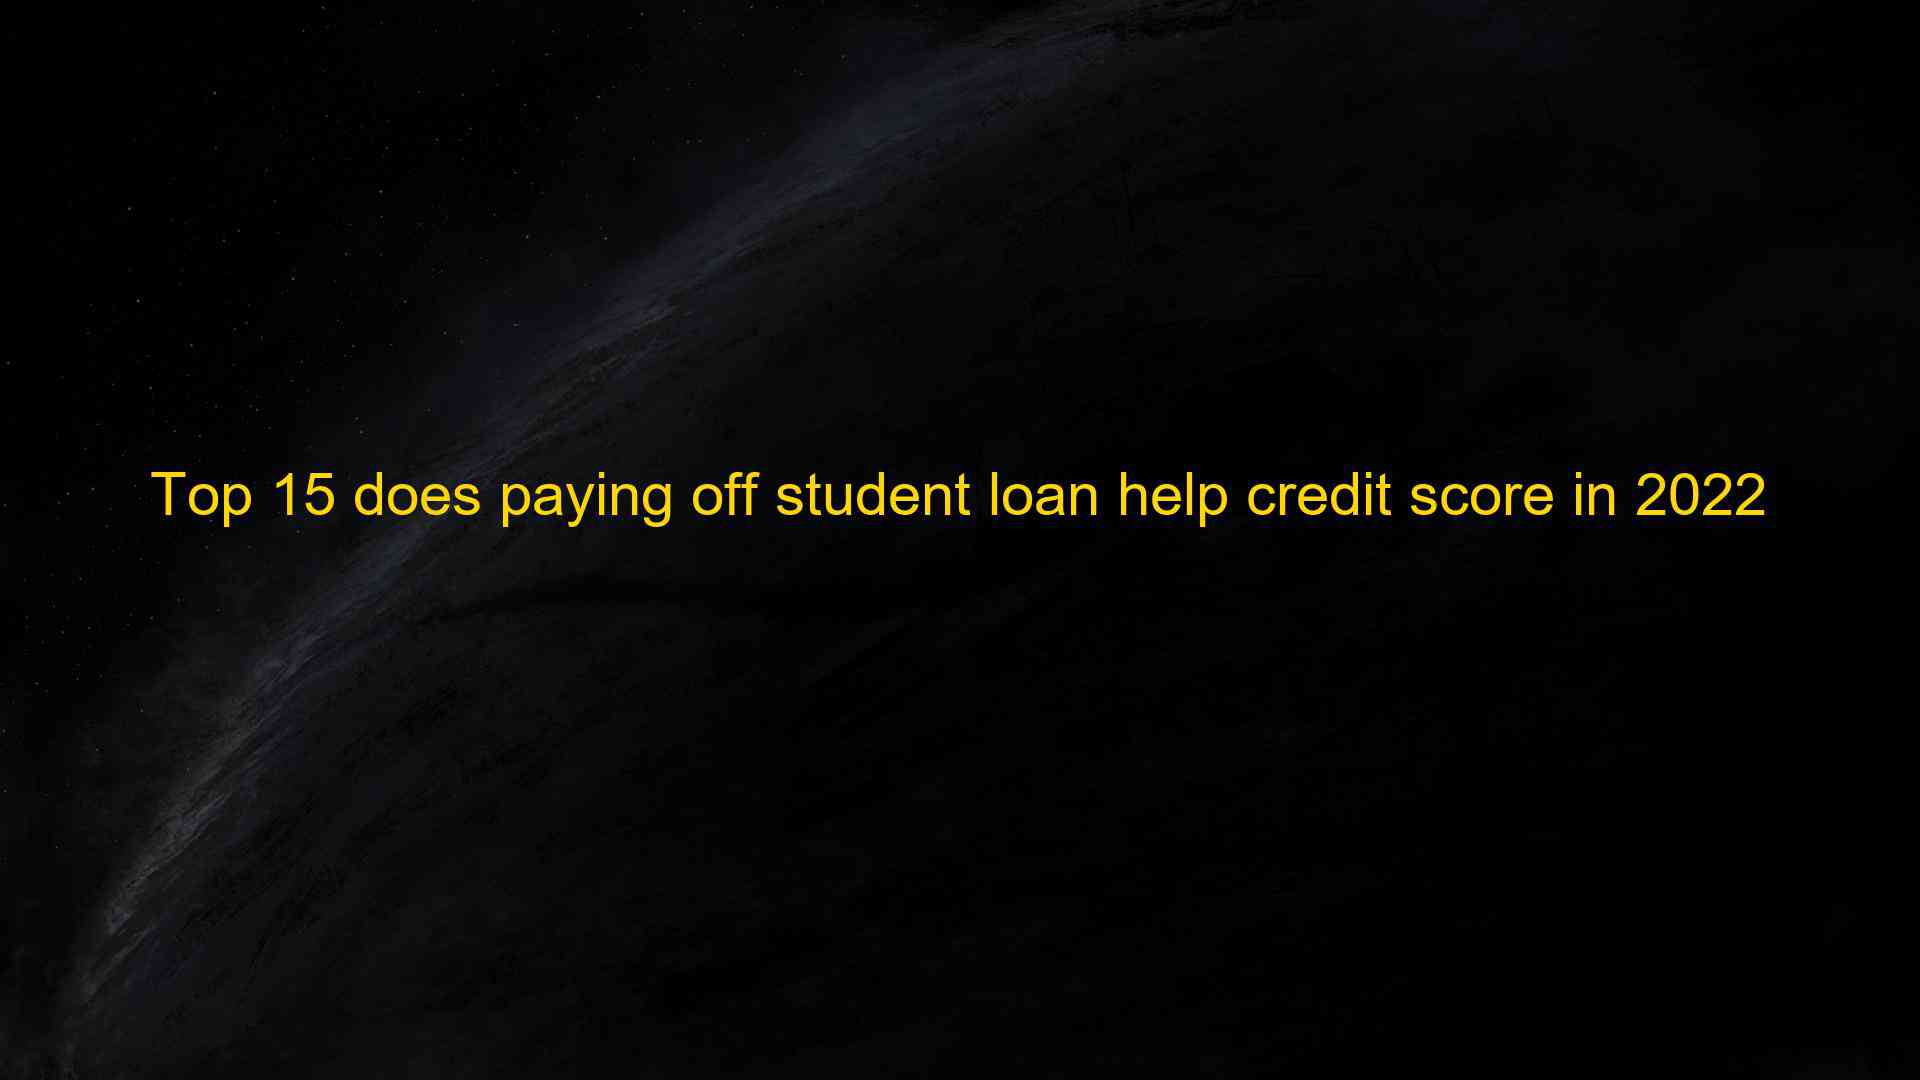 Top 15 does paying off student loan help credit score in 2022 1660241159